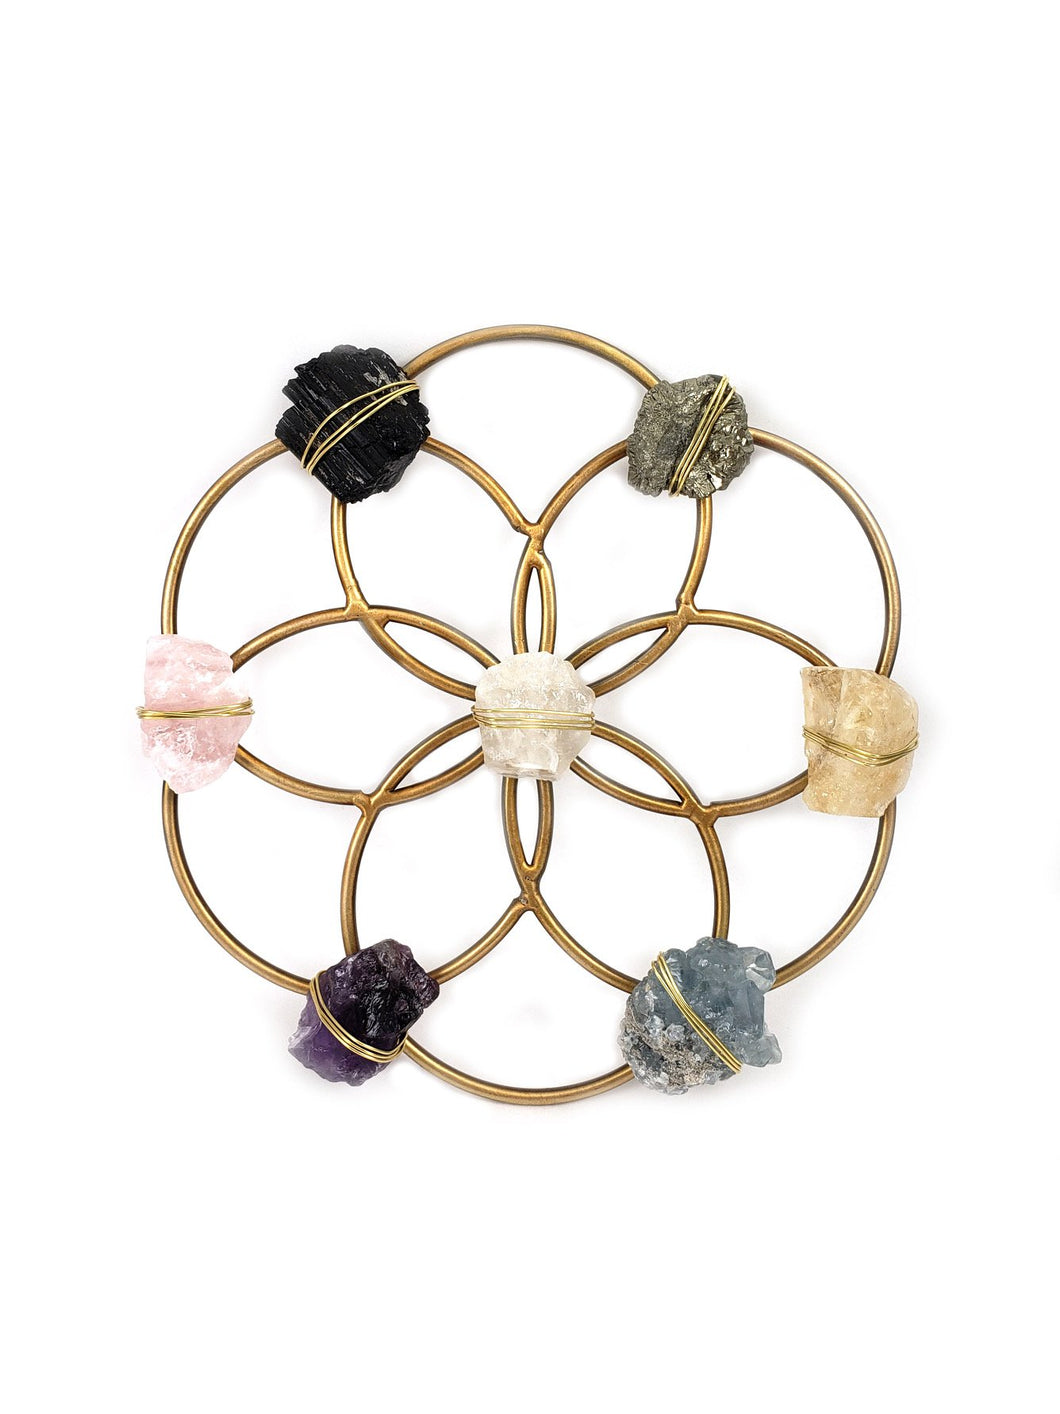 Small Flower of Life Healing Crystal Grid - Gold